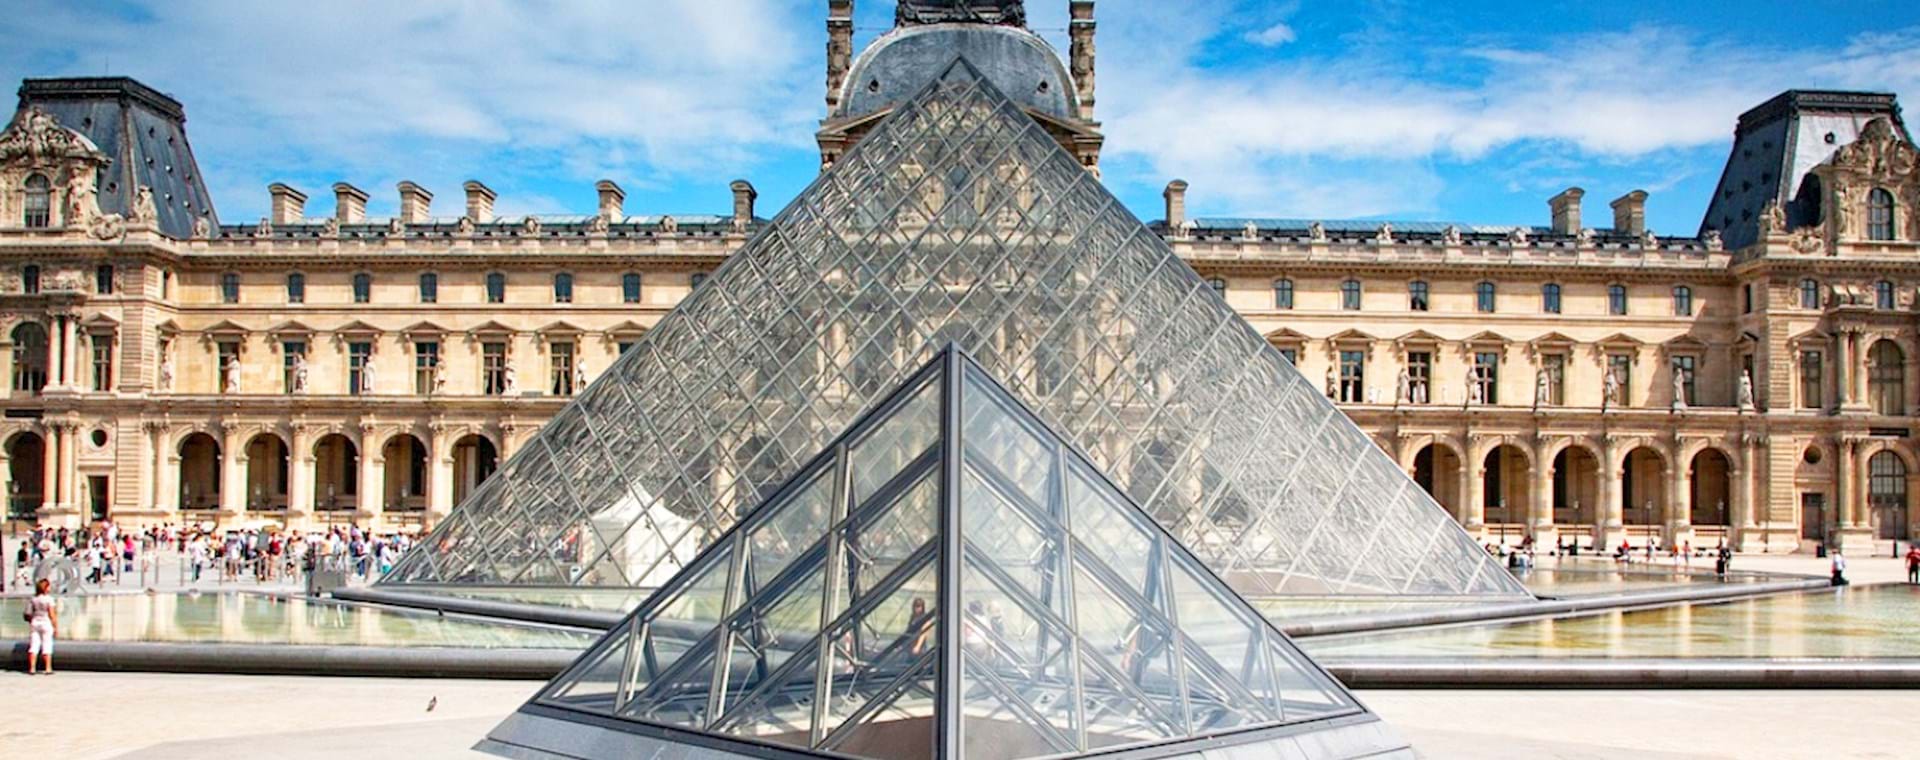 Front view of the Louvre Museum